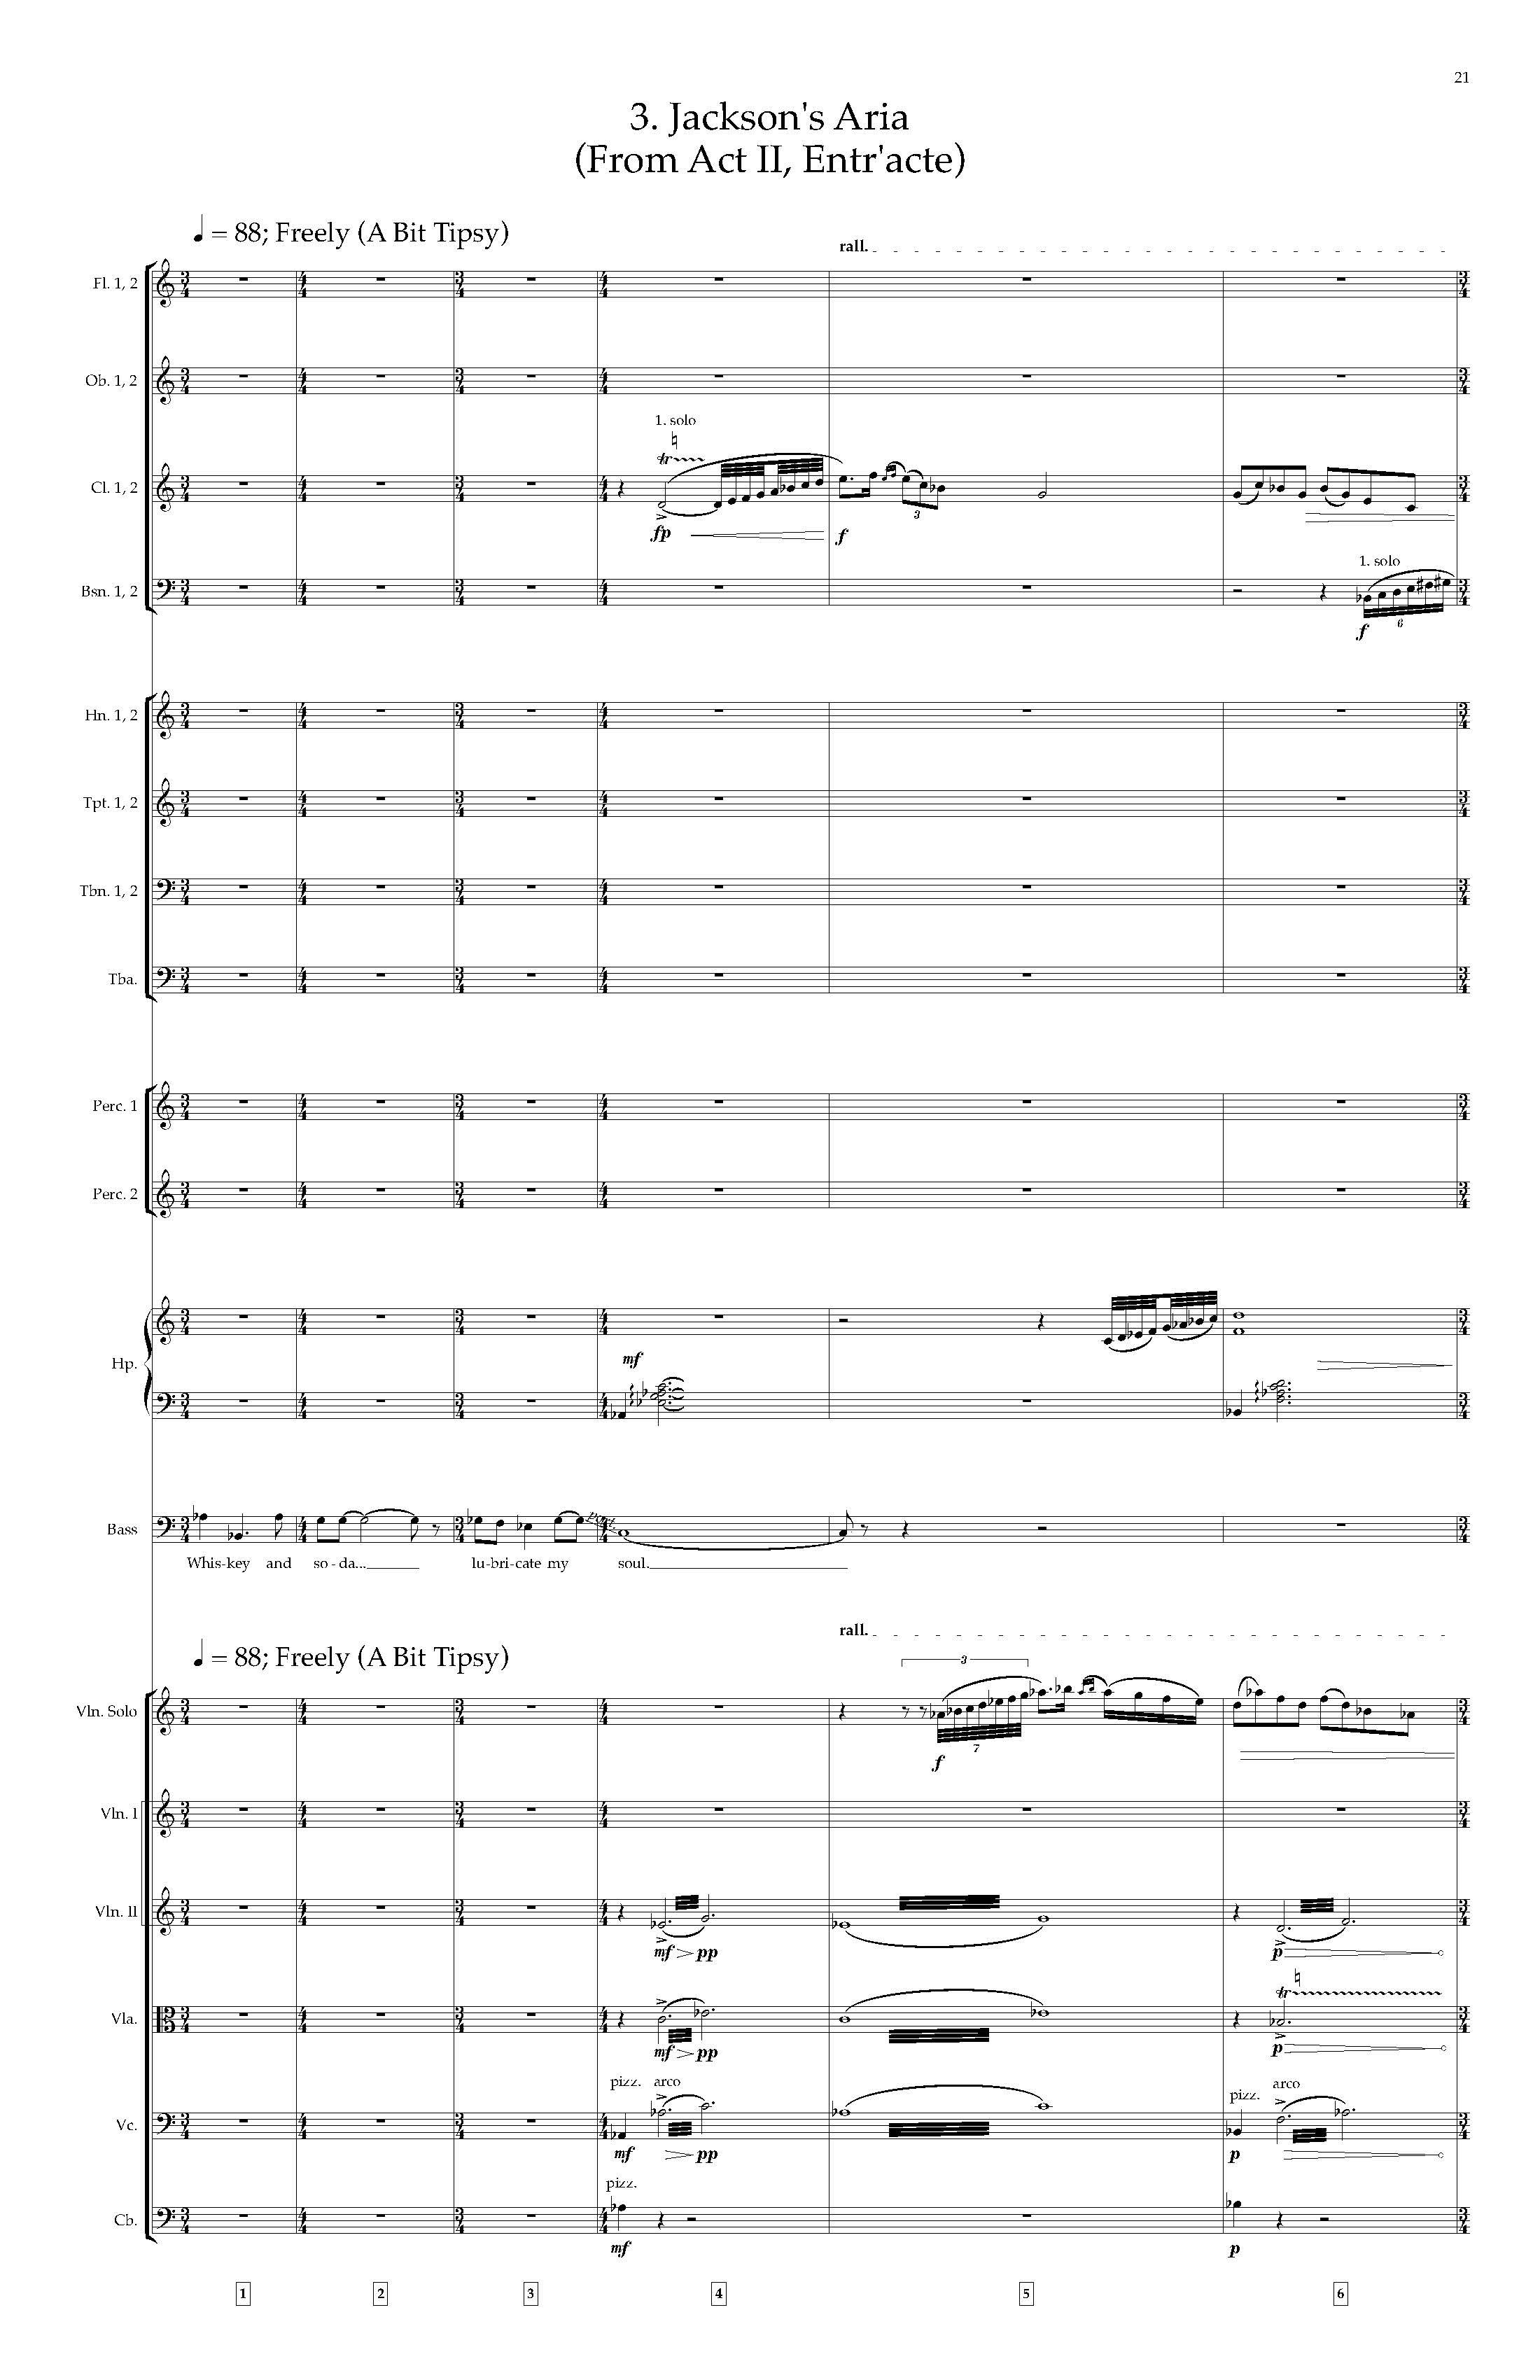 Arias and Interludes from HWGS - Complete Score_Page_27.jpg